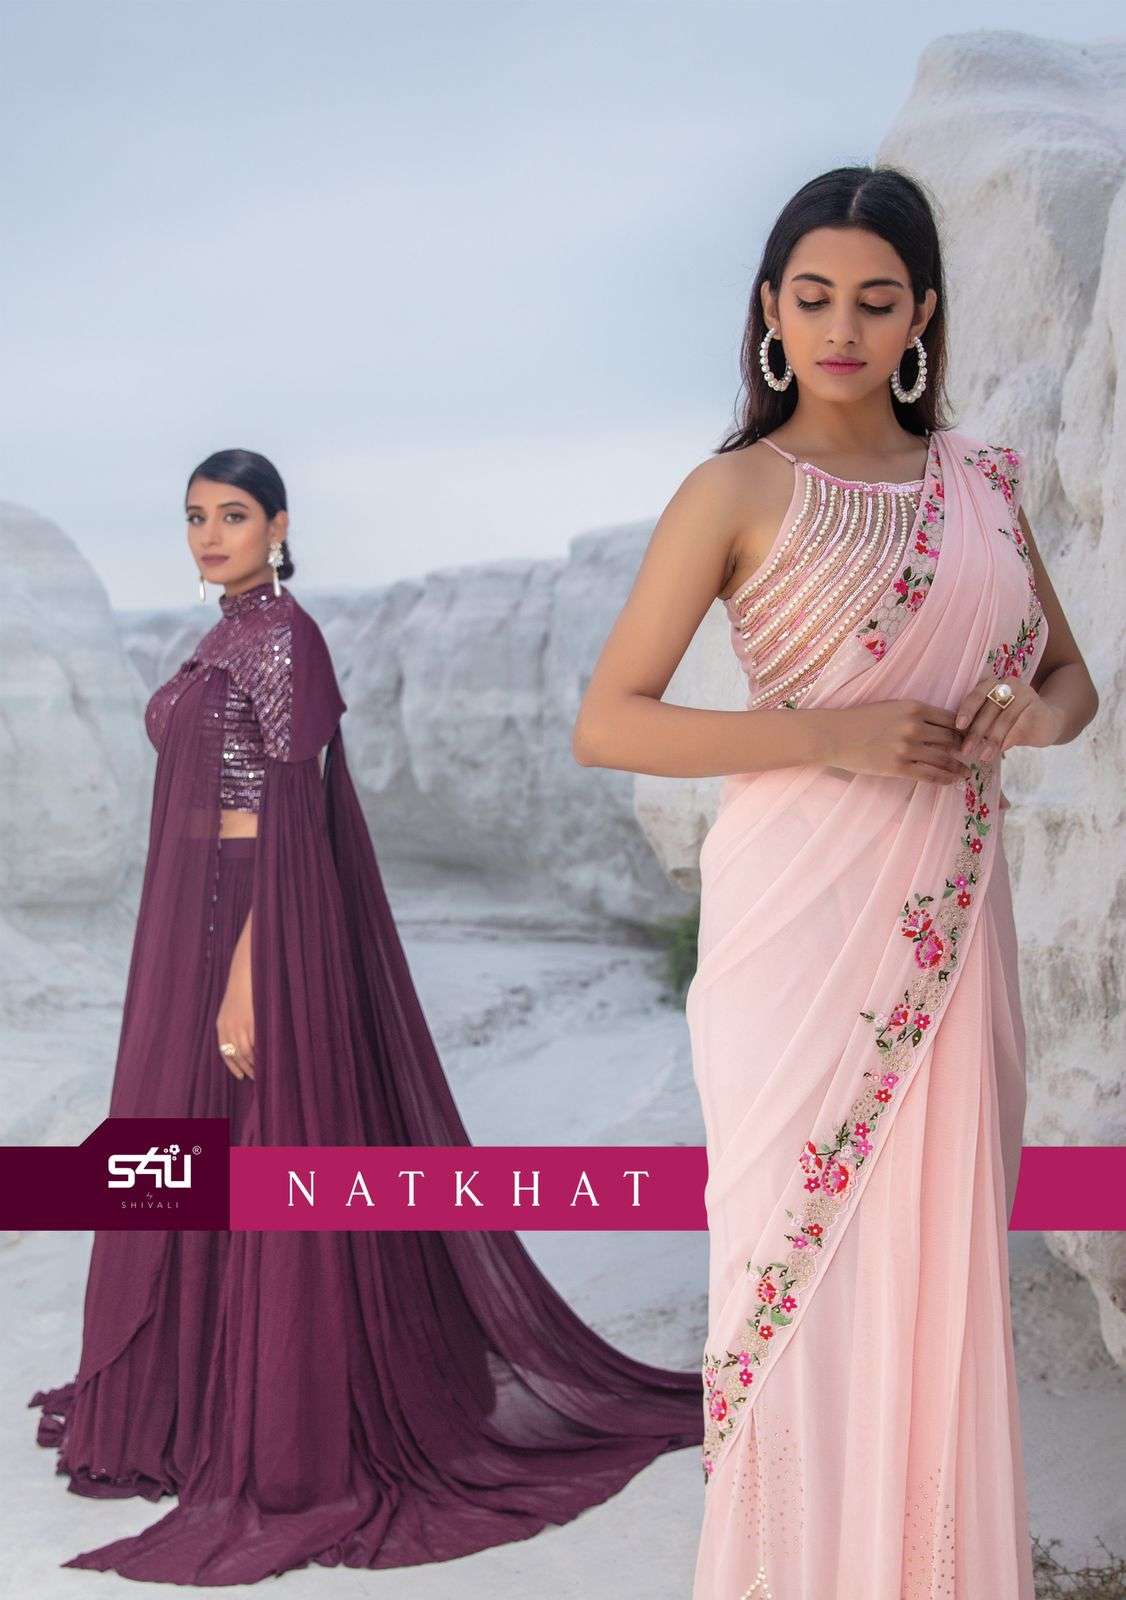 S4U NATKHAT GEORGETTE FESTIVE LOOK and  Attractive  look  SAREE CATALOGue